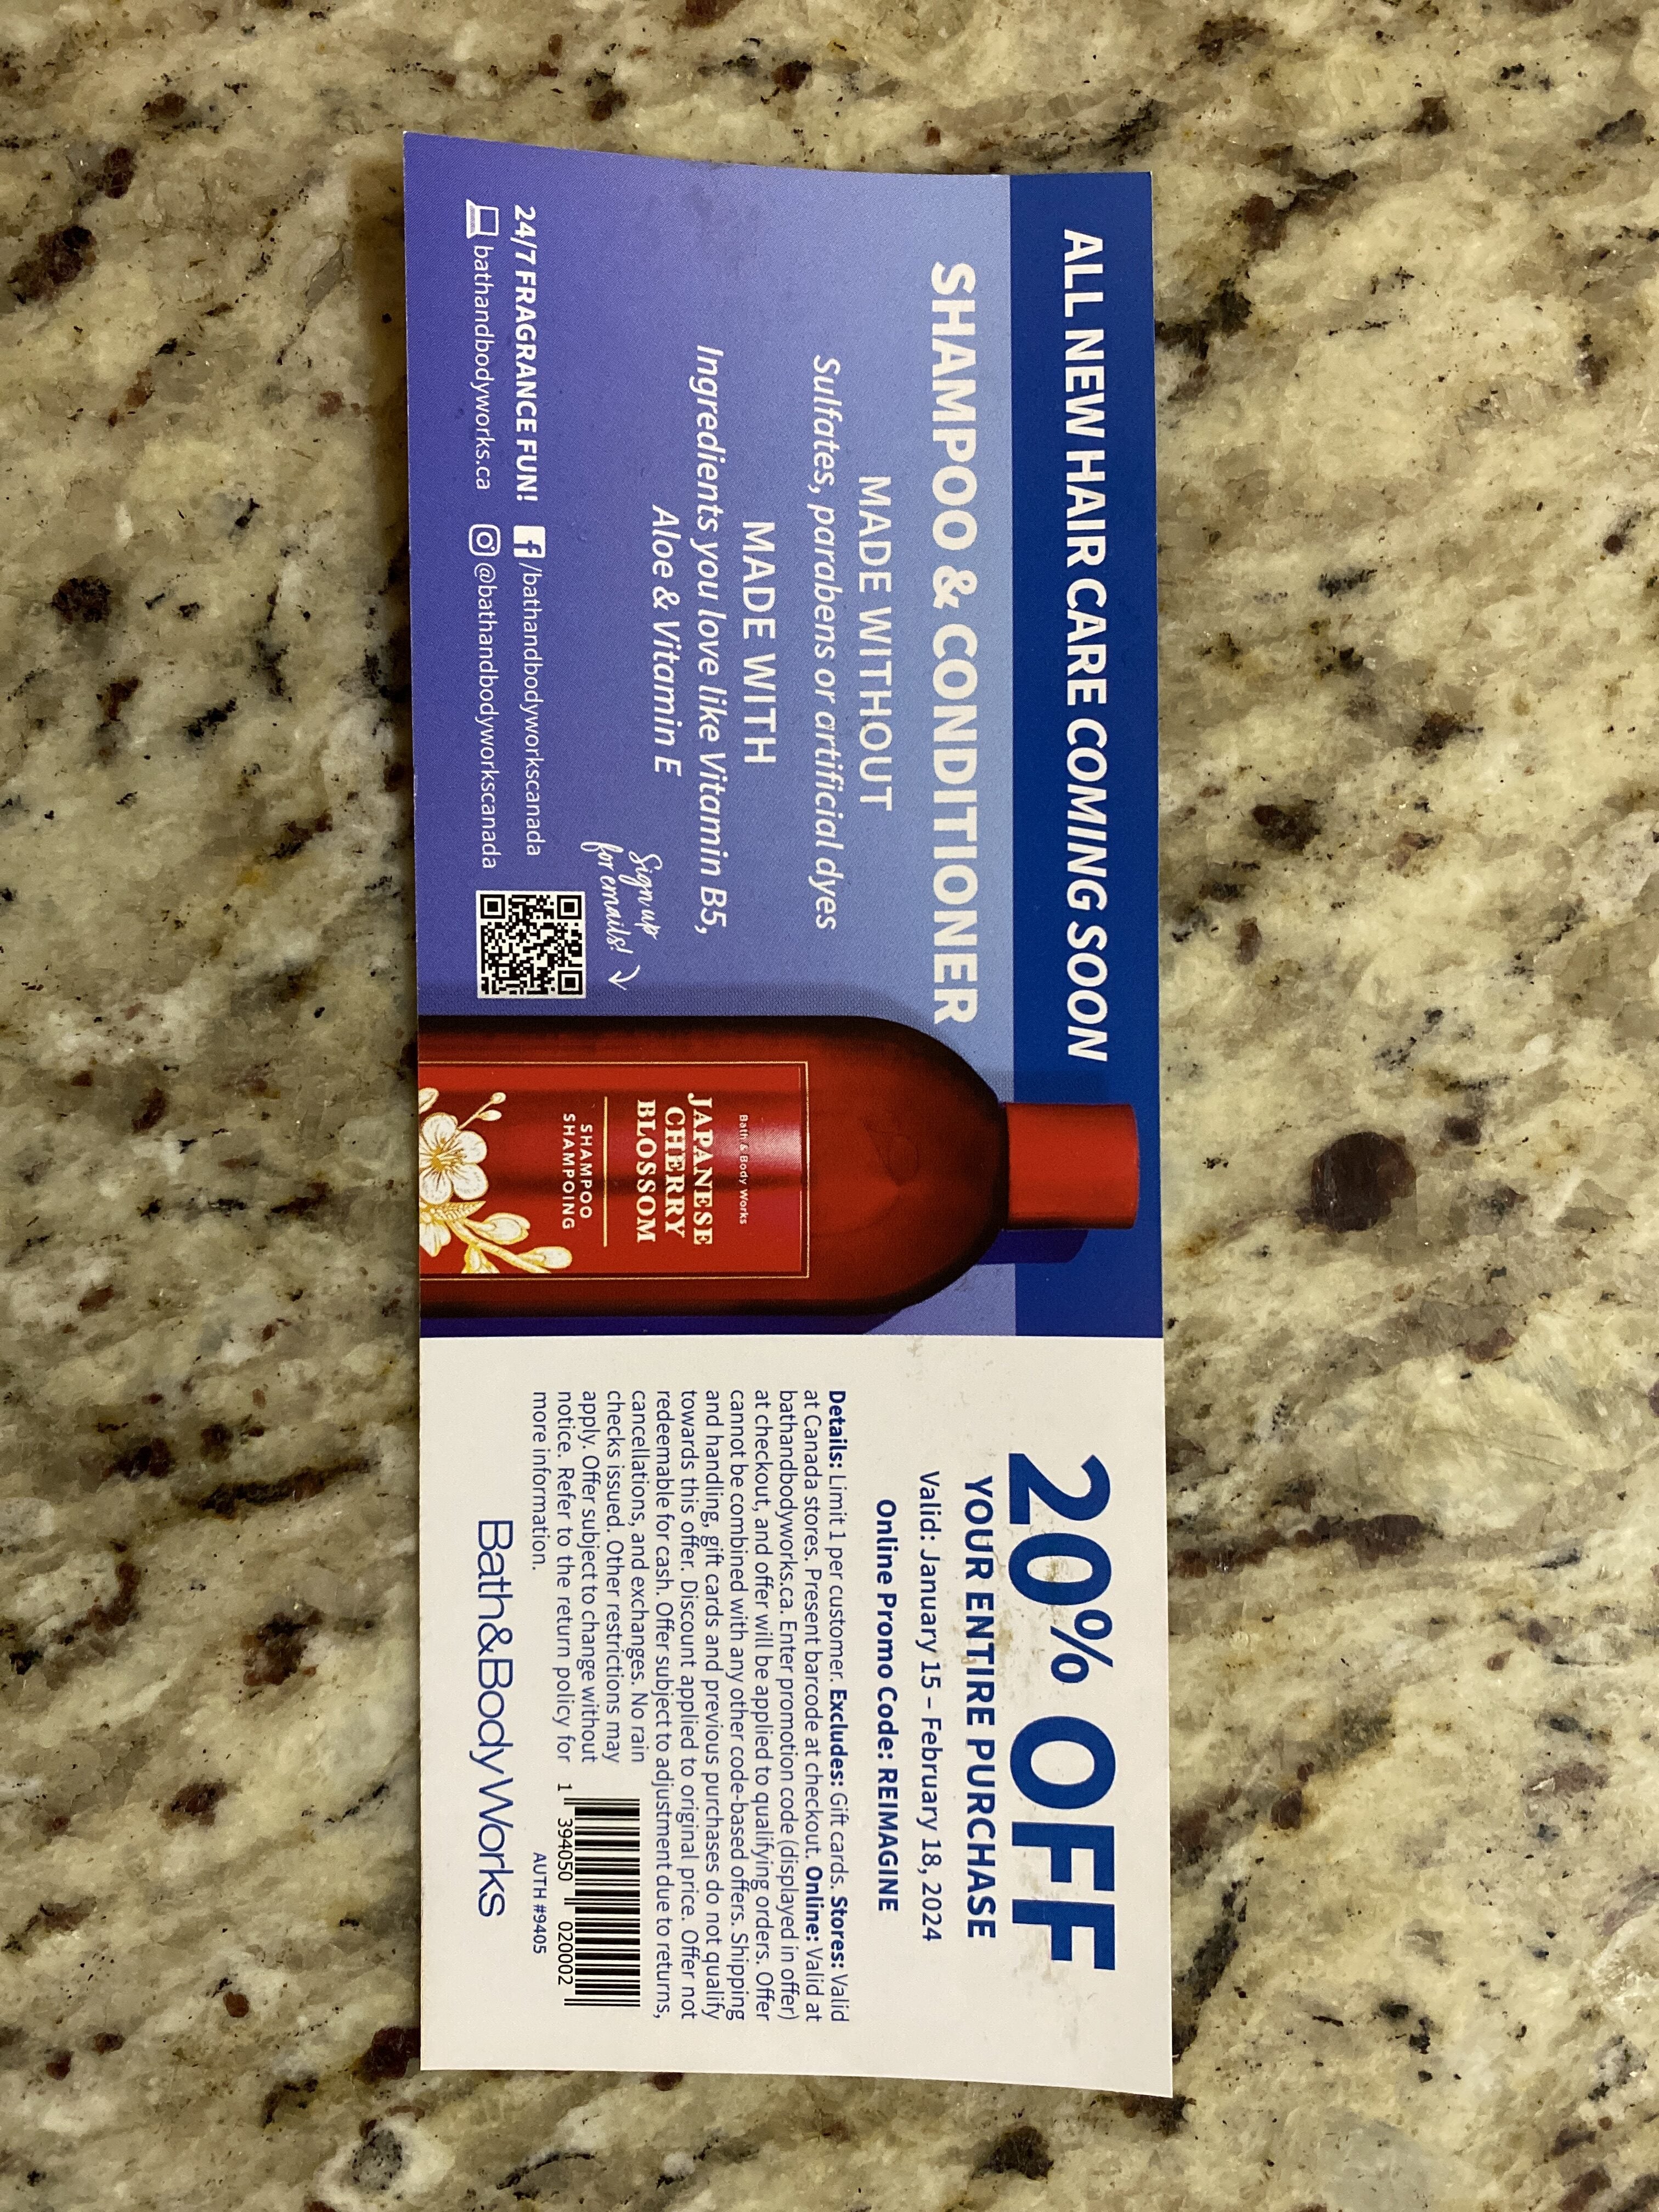 Bath & Body Works] 20% discount on entire purchase coupon from Jan